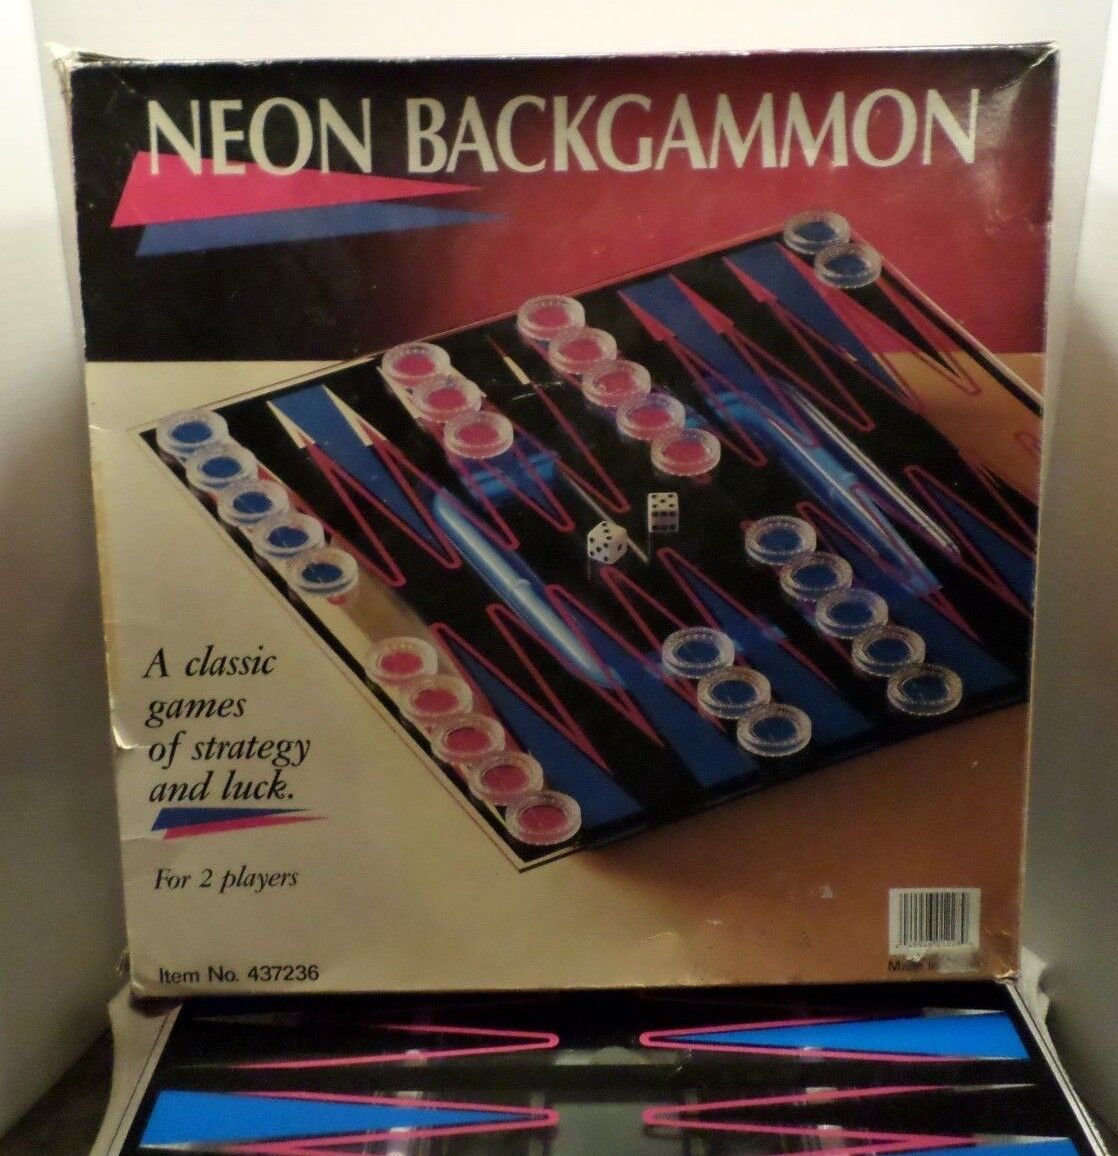 RARE Vintage Neon Backgammon Game In Original Box Pink & Blue 2 Players 